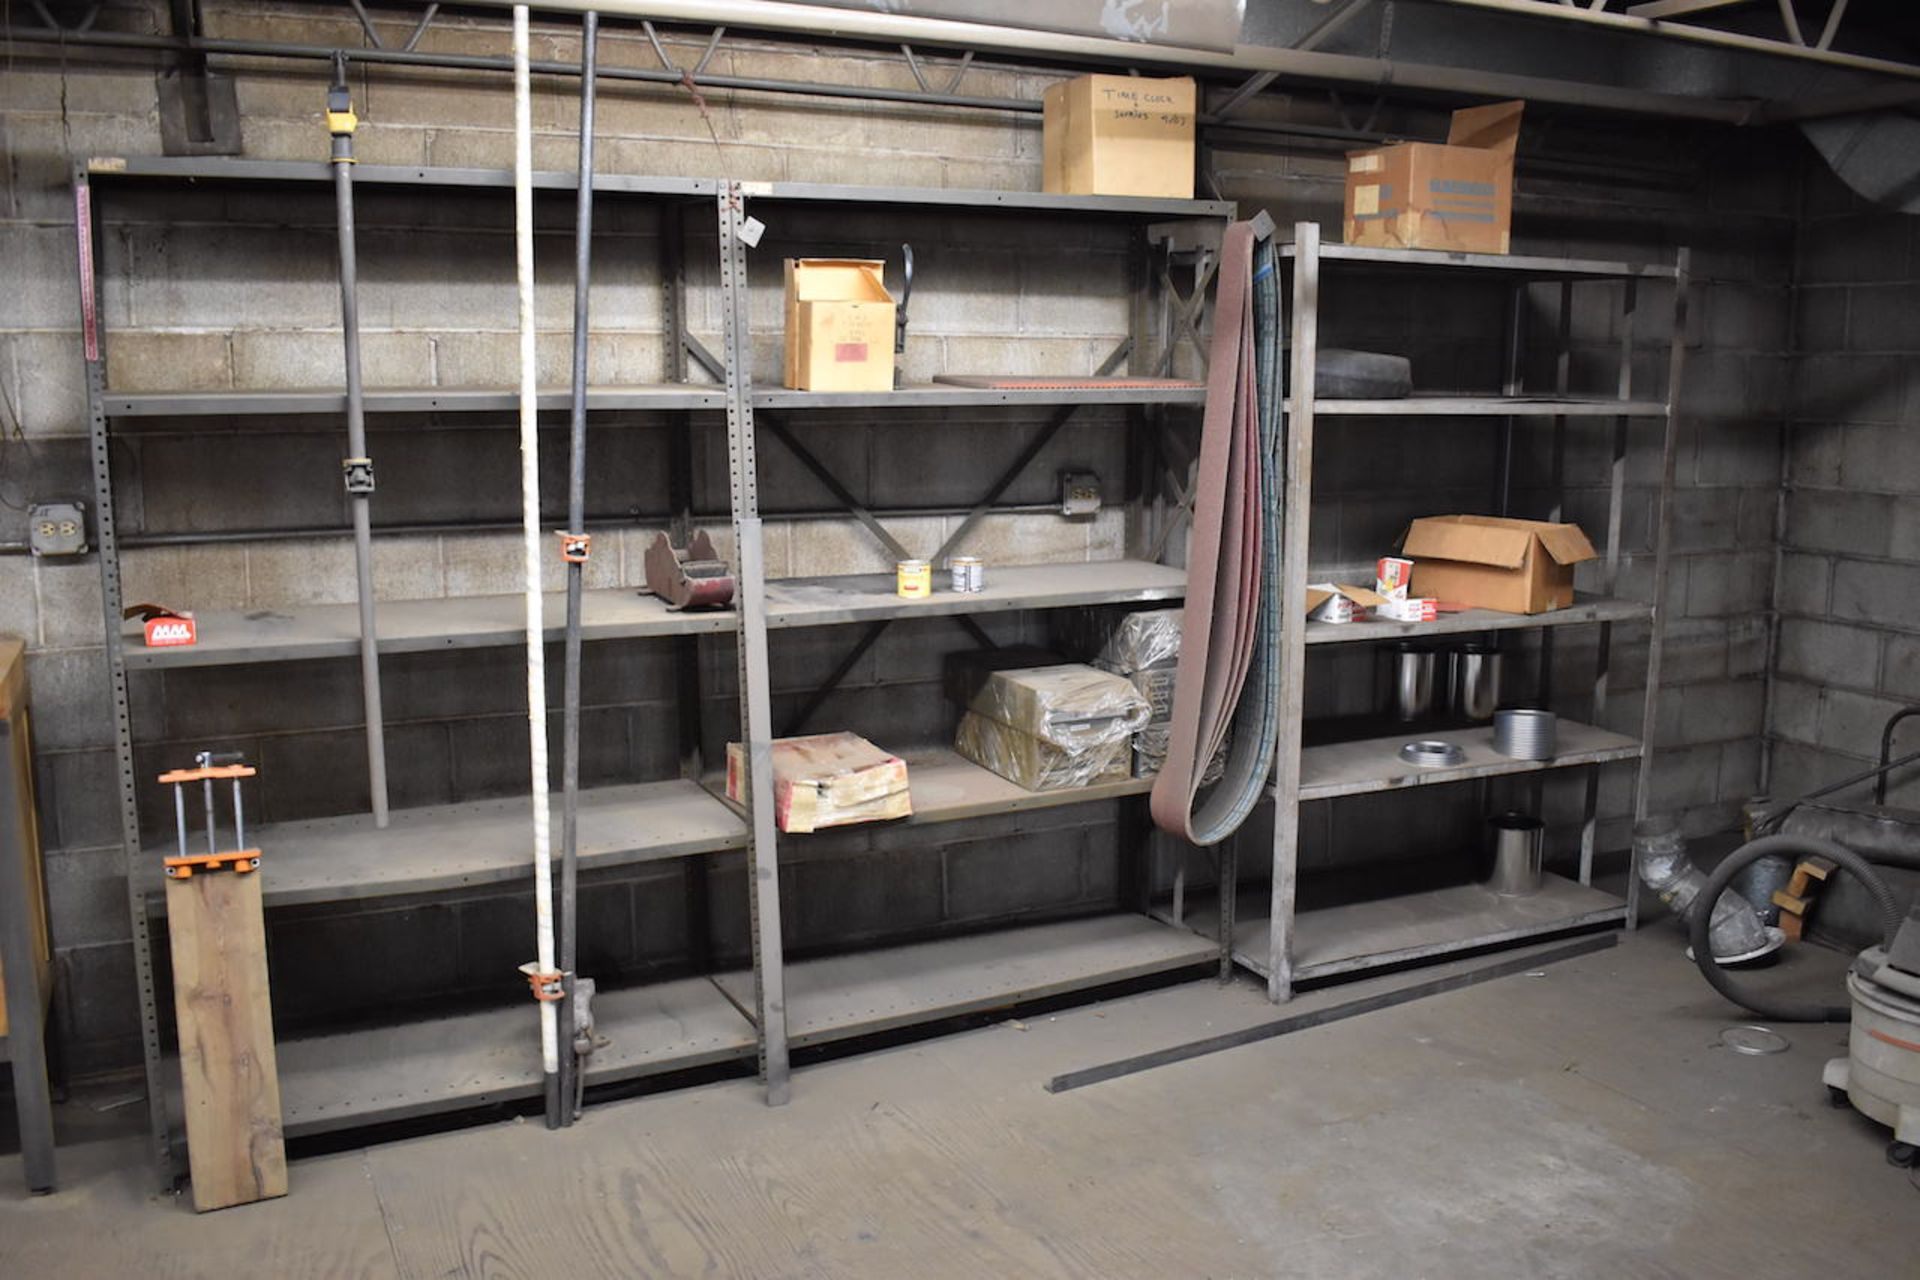 ASSORTED WORK BENCHES, FILE CABINETS, METAL SHELVING AND STORAGE CABINETS IN UPSTAIRS MEZZANINE. ( - Image 5 of 9